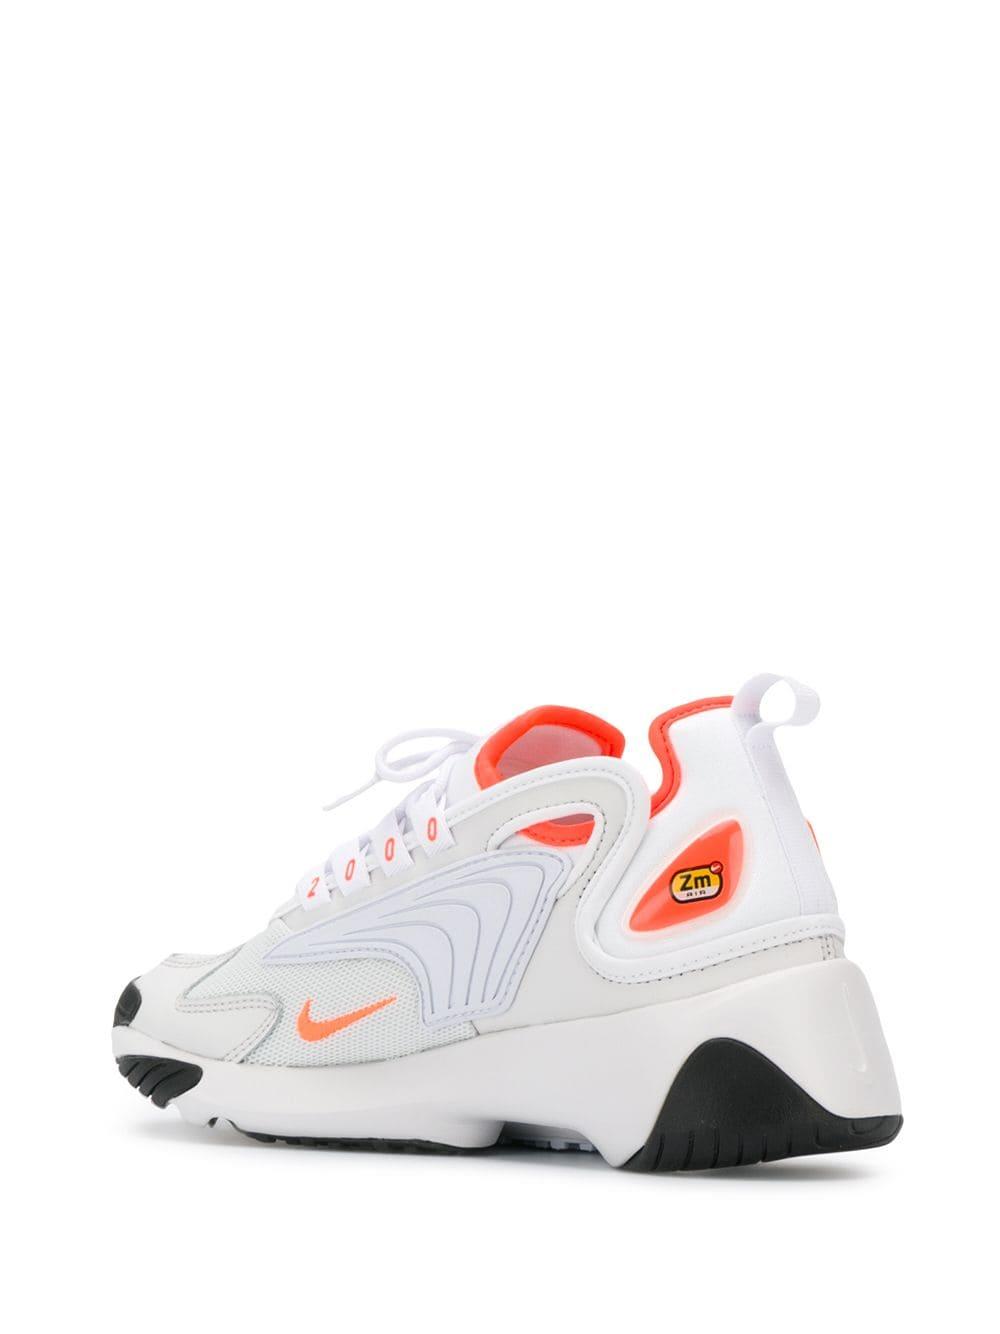 Nike Leather Off White And Orange Zoom 2k Sneakers Lyst